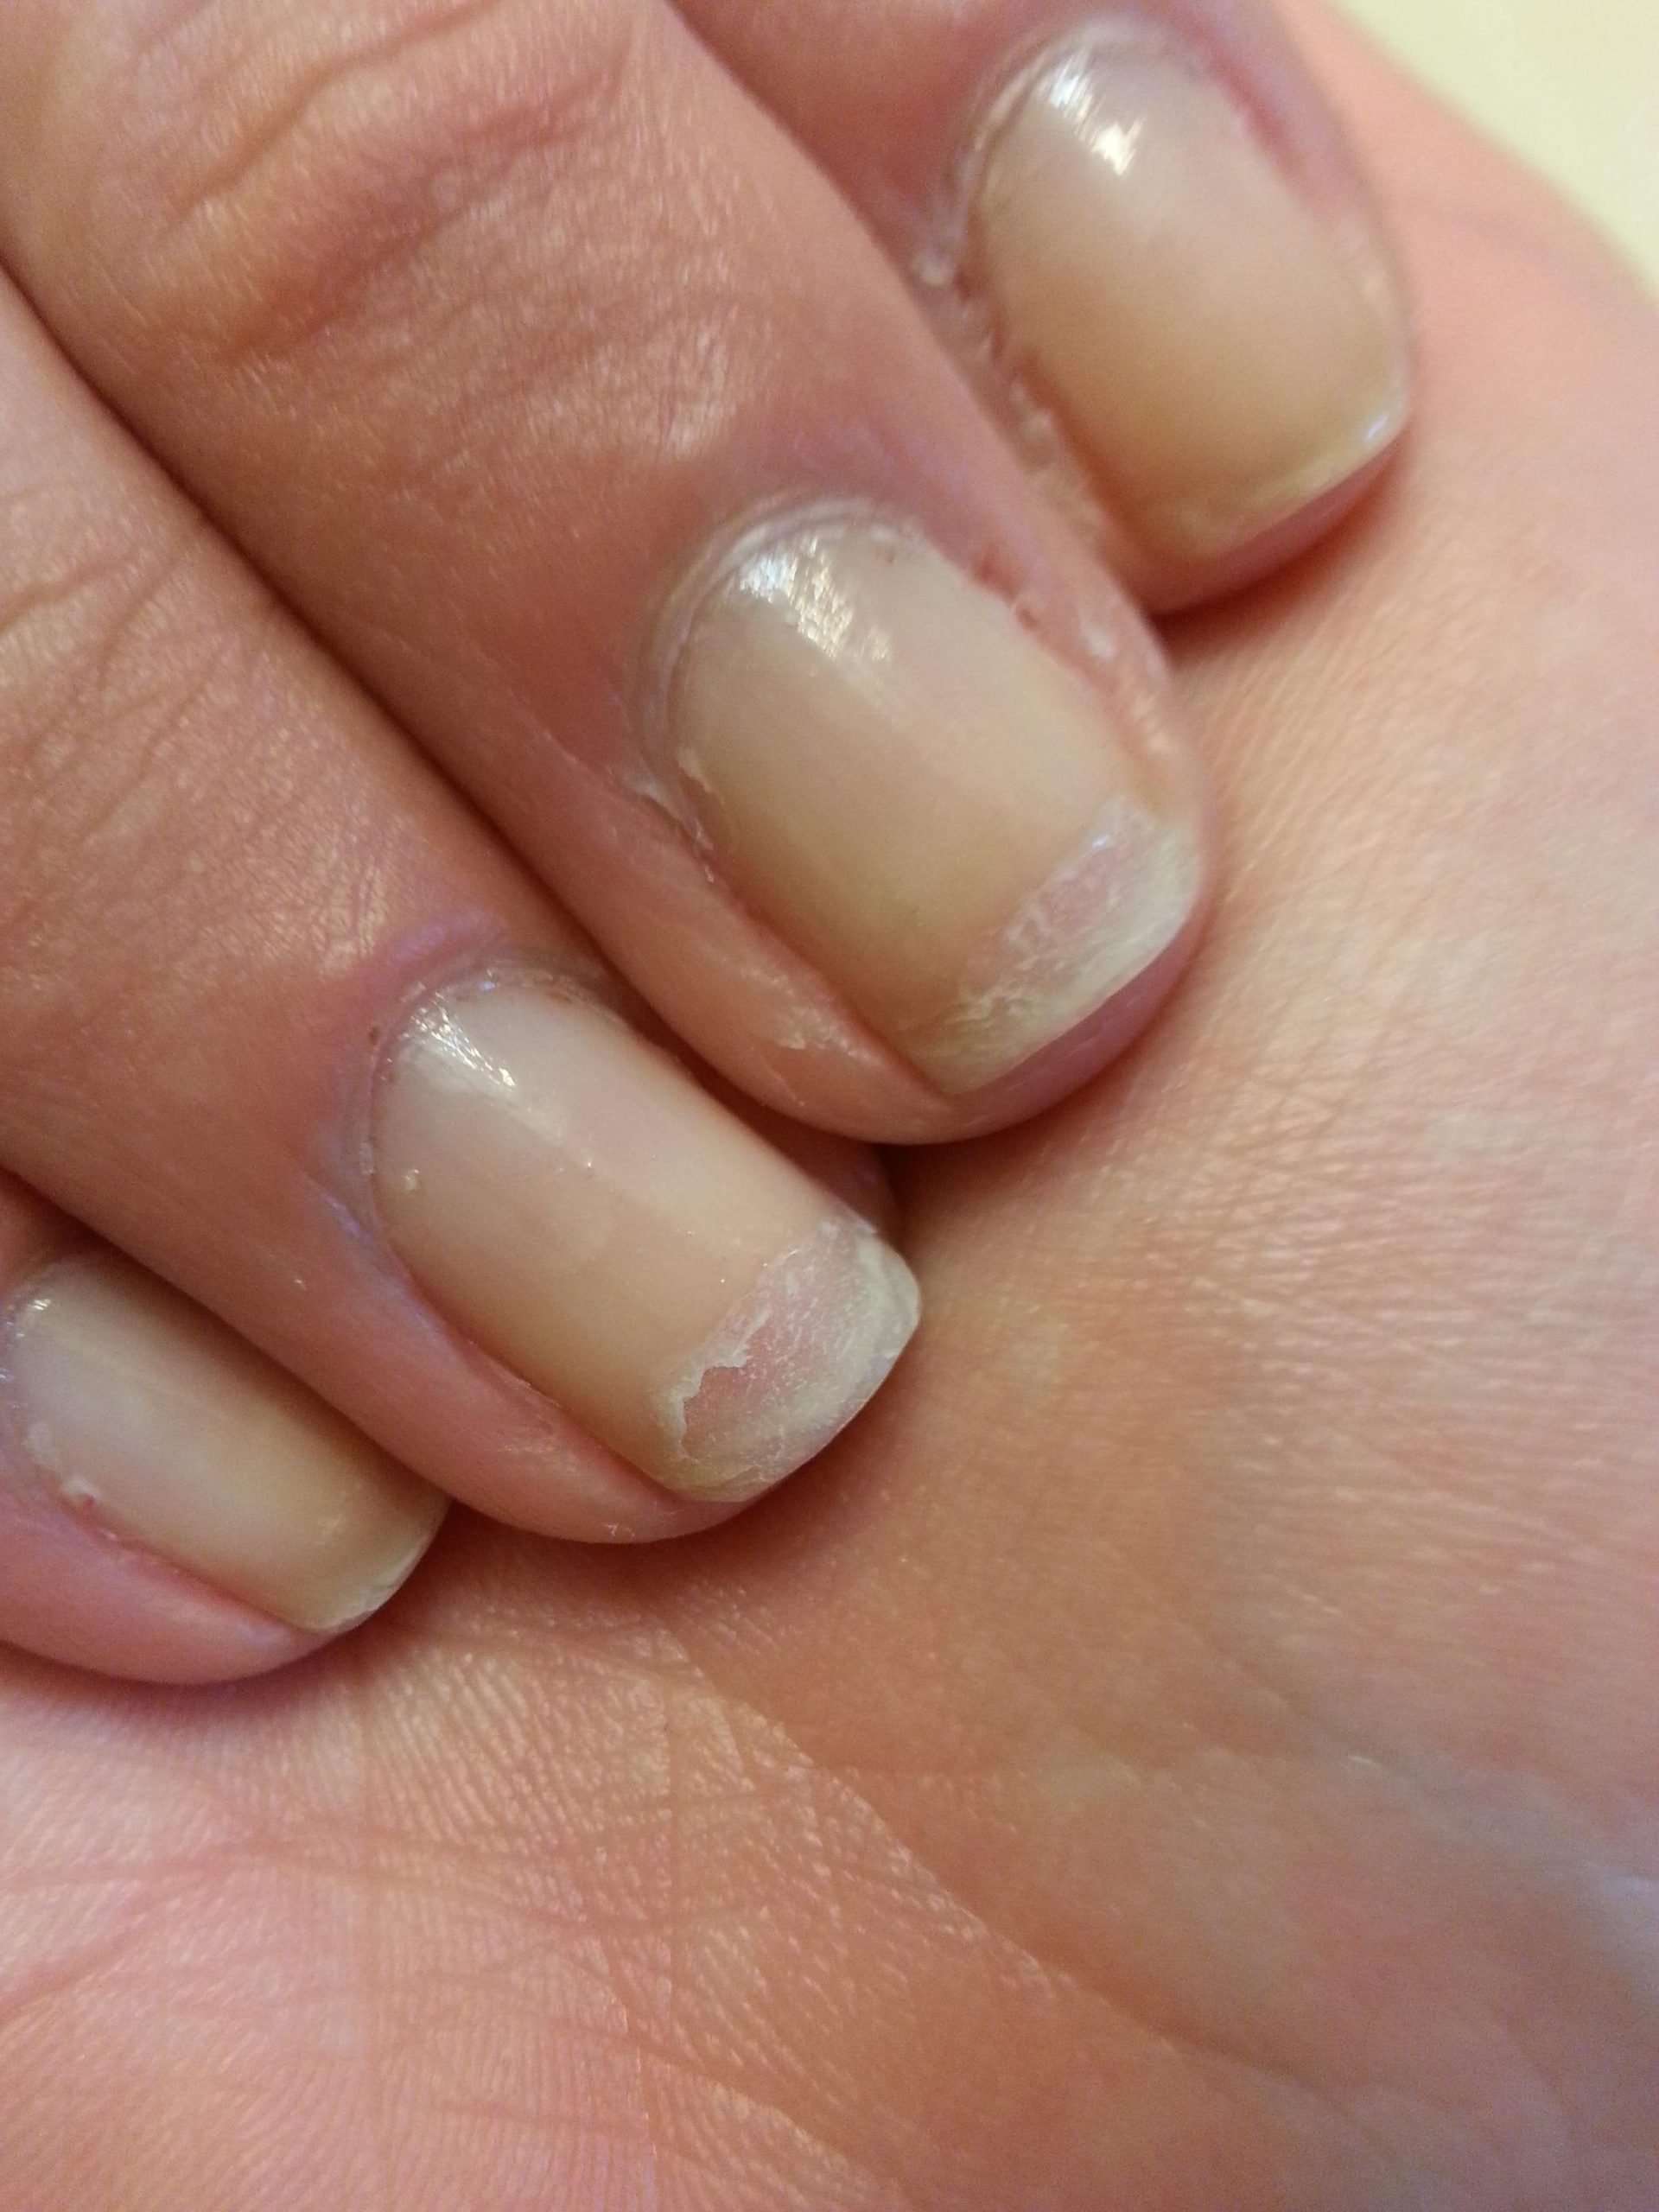 what do you ladies suggest to prevent my nails from ...